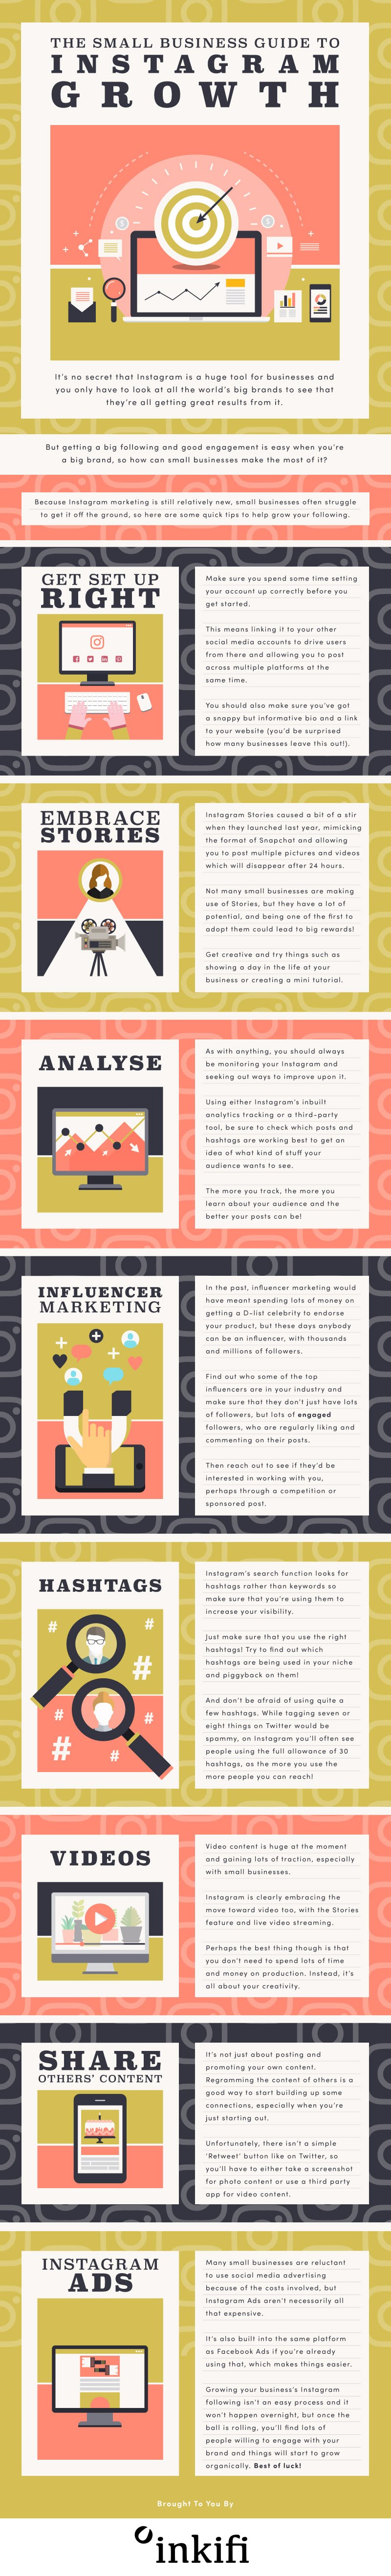 The Small Business Guide to Instagram Growth - #infographic